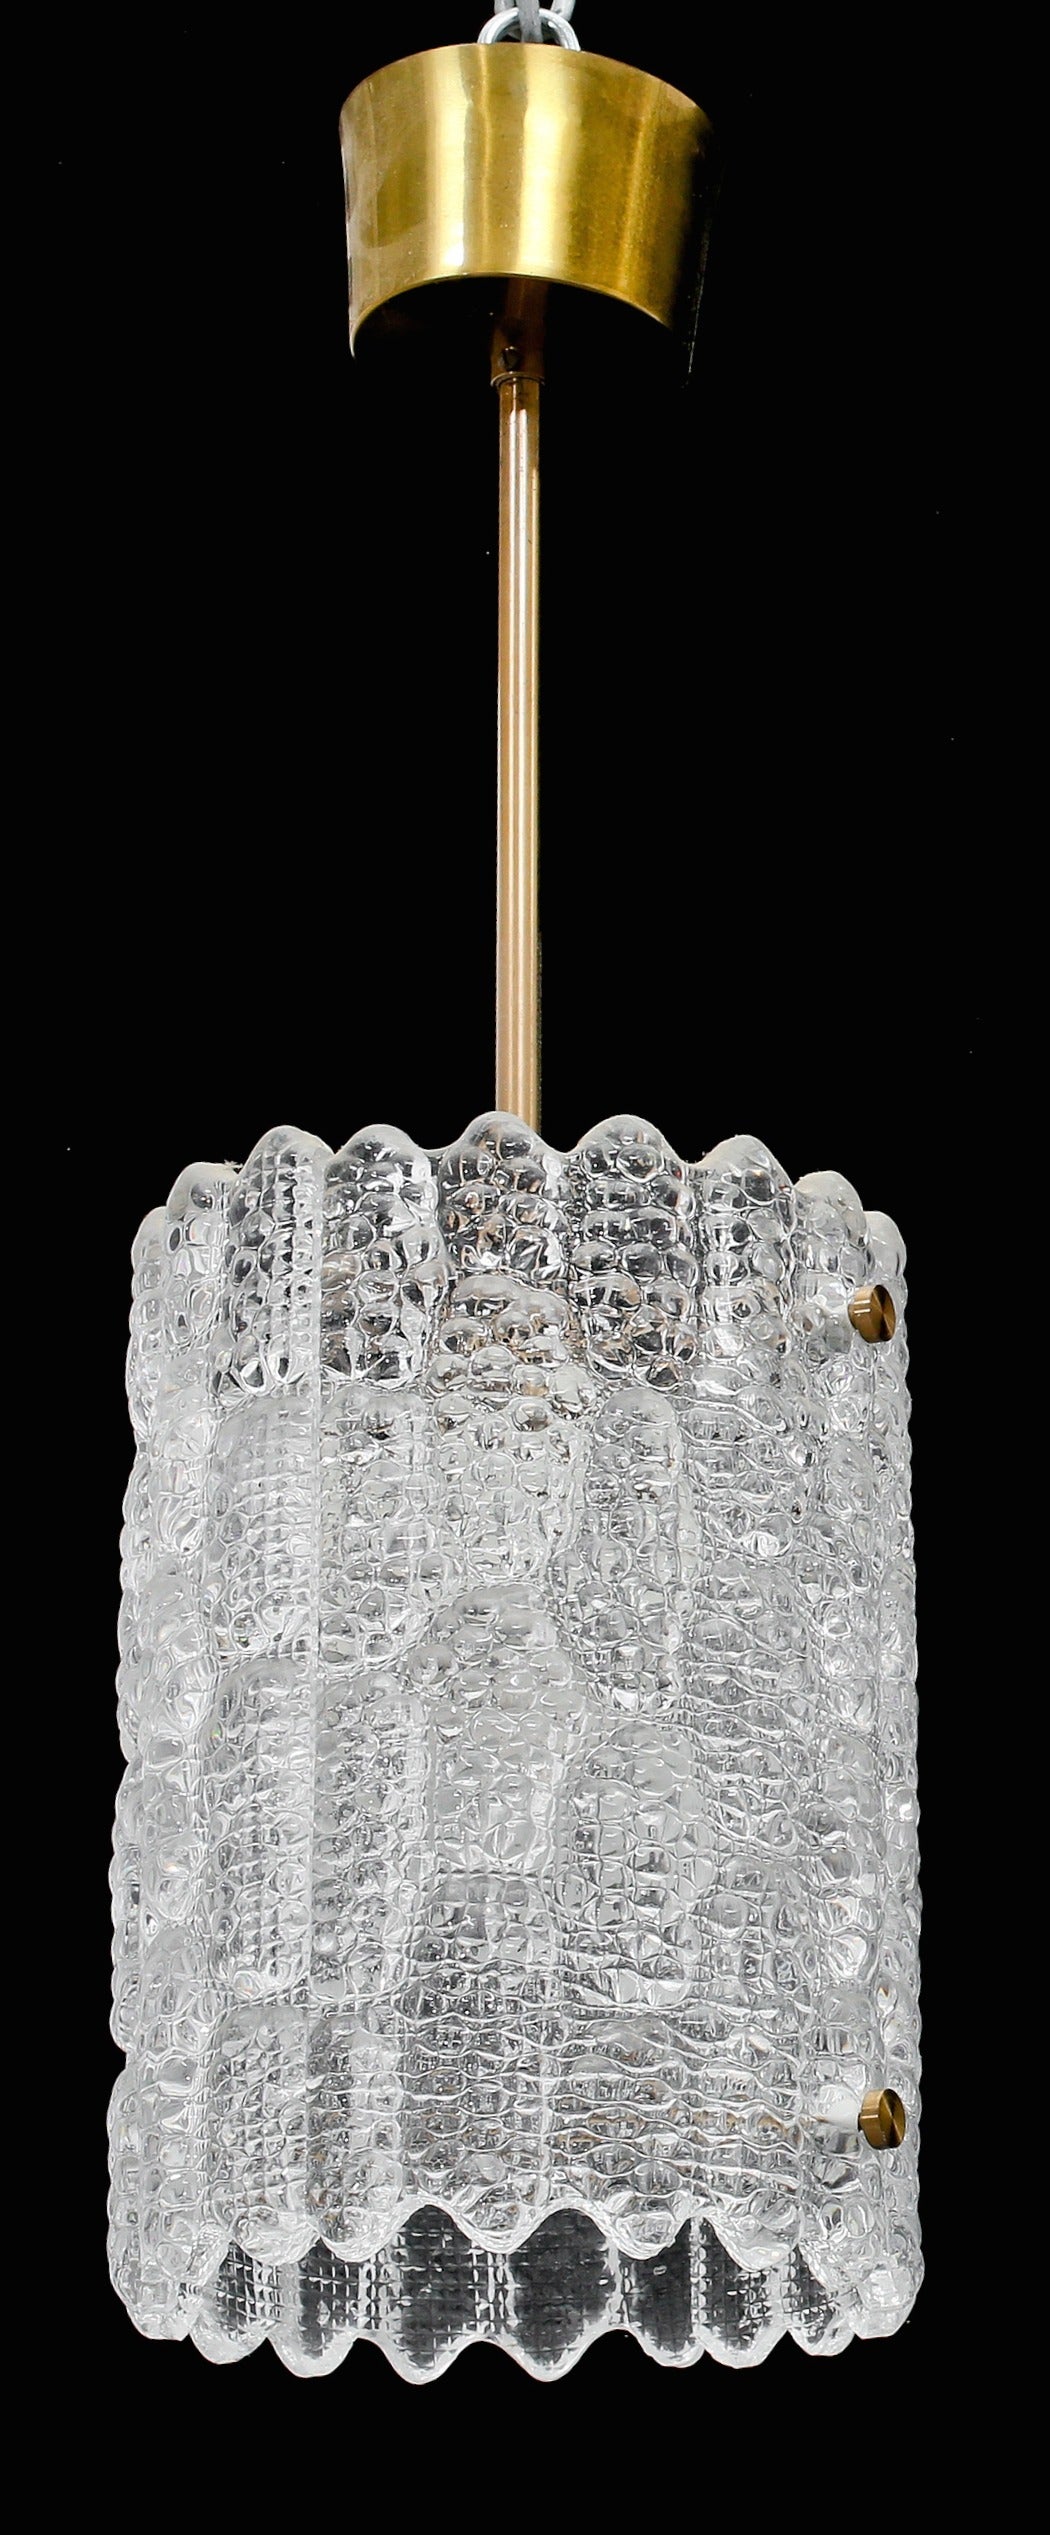 Pair of clear textured crystal lights in two halves held with brass hardware. 1950's.  By Carl Fagerlund for Orrefors, Sweden.  Total drop including canopy is 22 inches.  Glass is 10 inches high by 7 inches diameter. Each takes a single standard